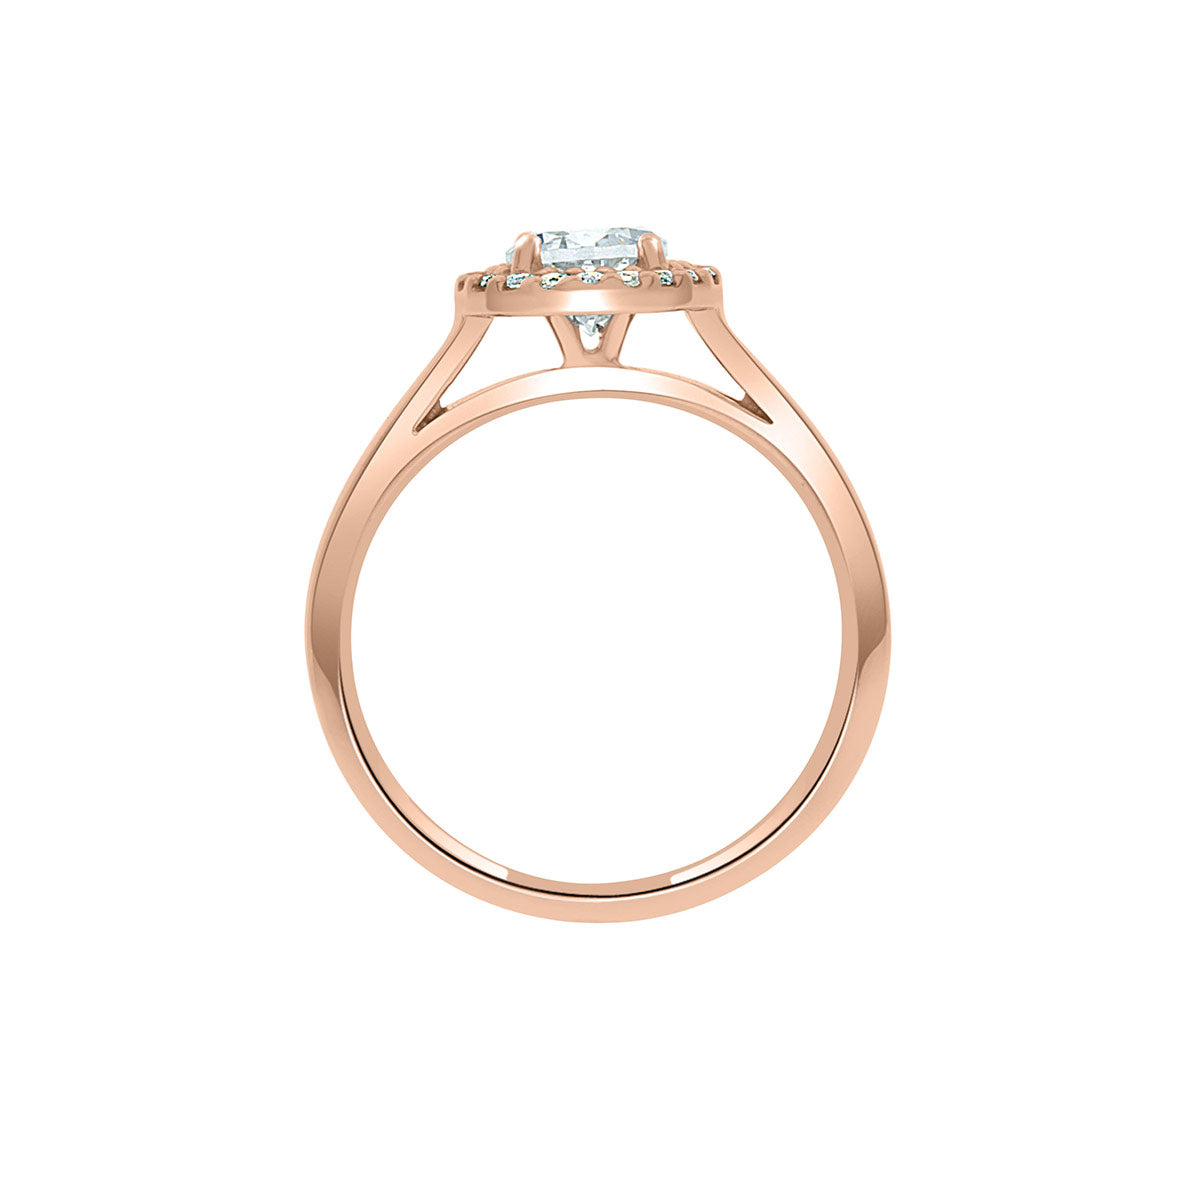 Round Vintage Engagement Ring in yellow gold, in an upright position against a white background.